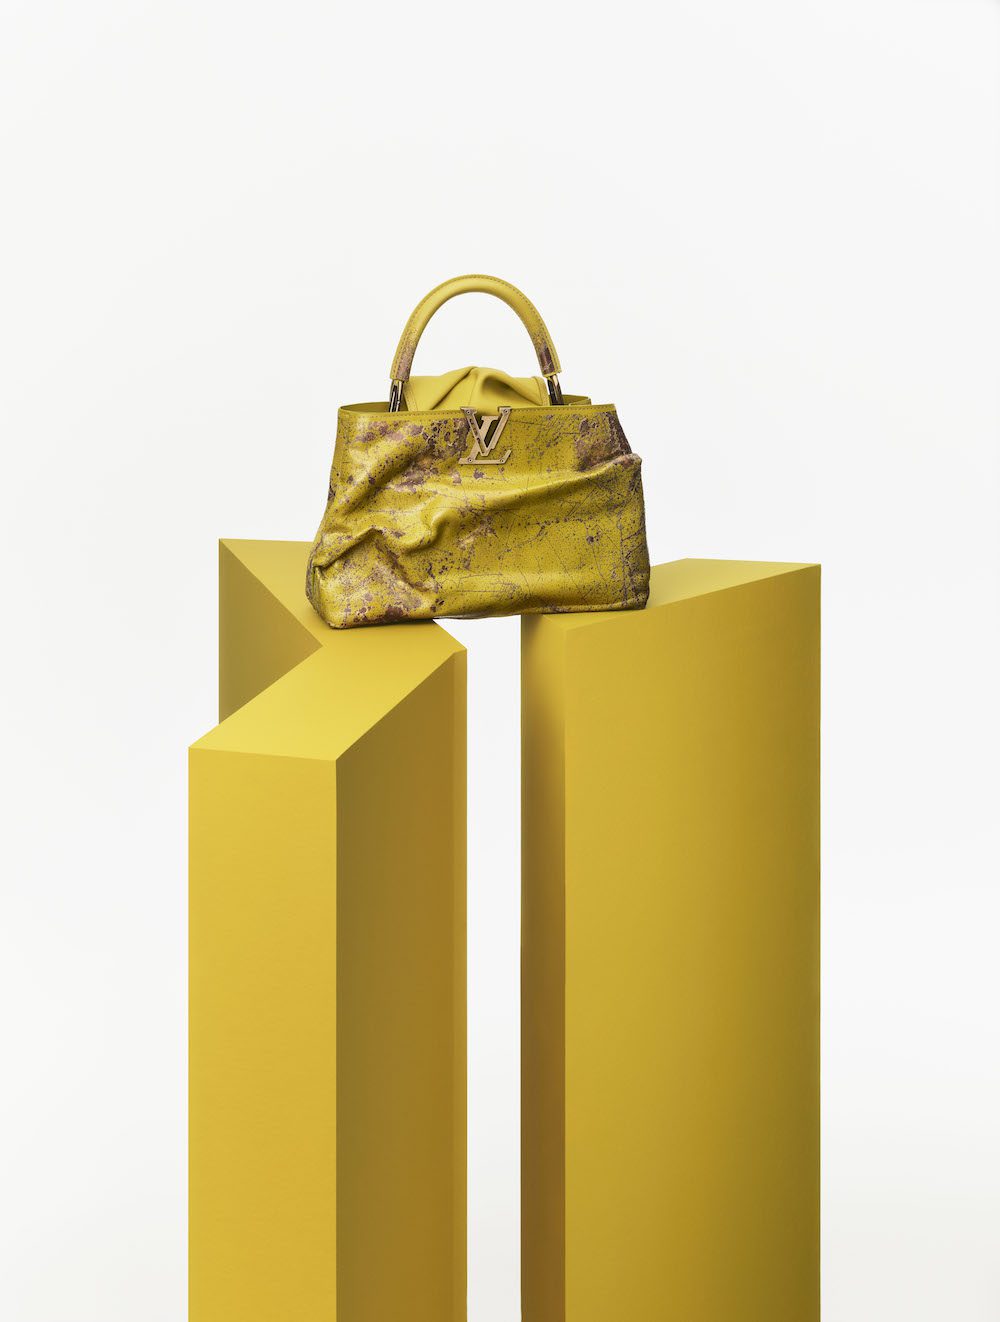 PHOTOS are published / Louis Vuitton launches the bag with the